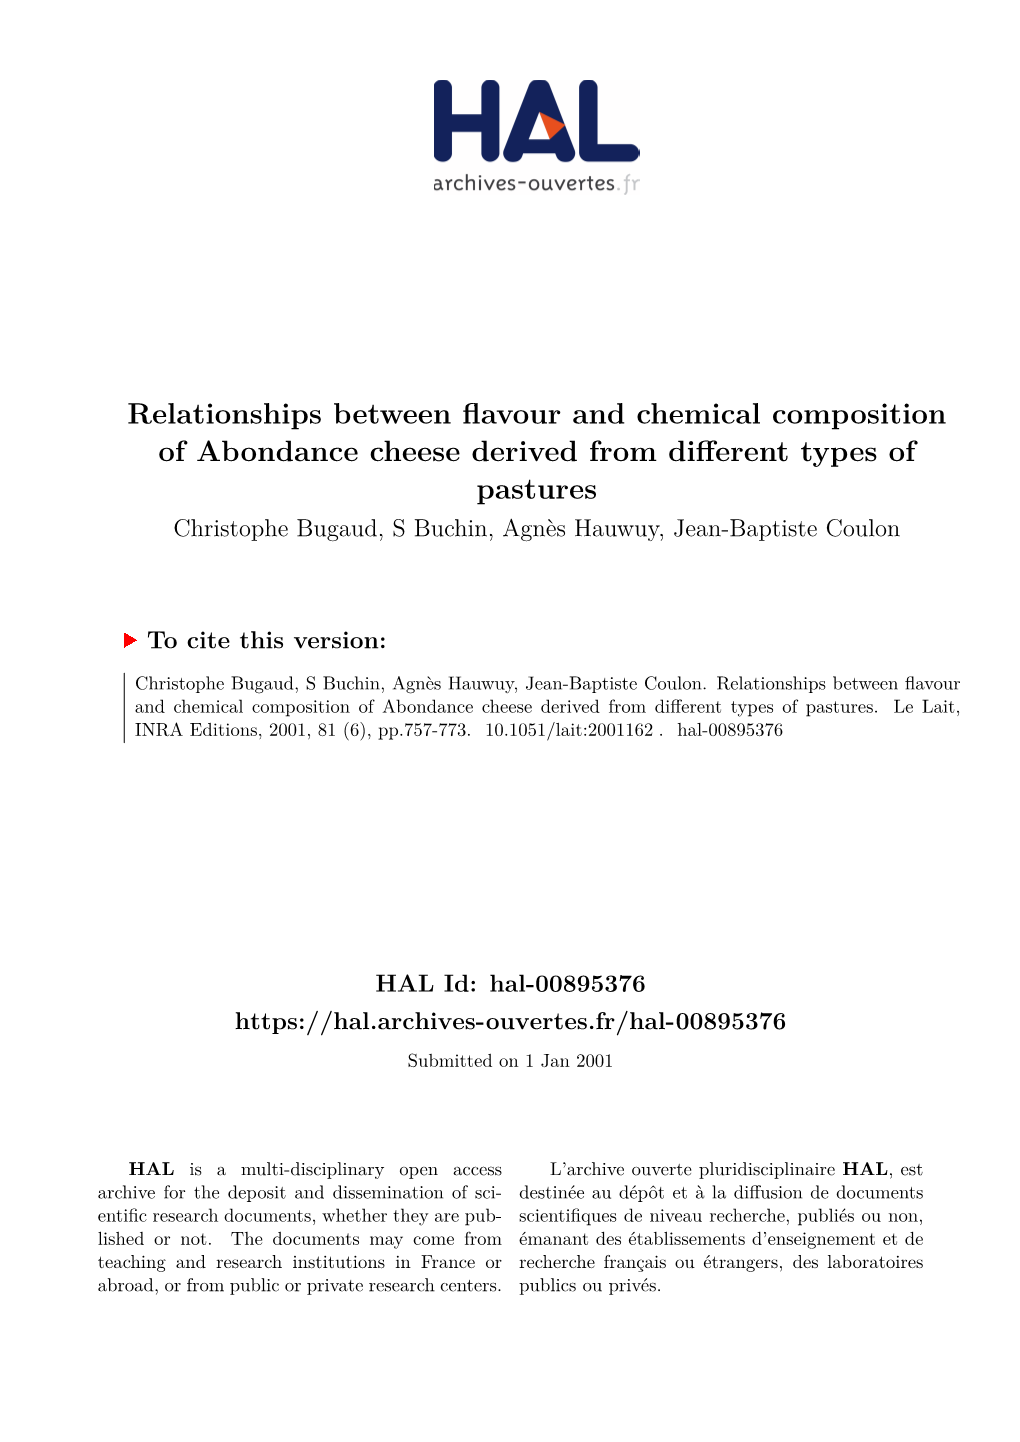 Relationships Between Flavour and Chemical Composition Of